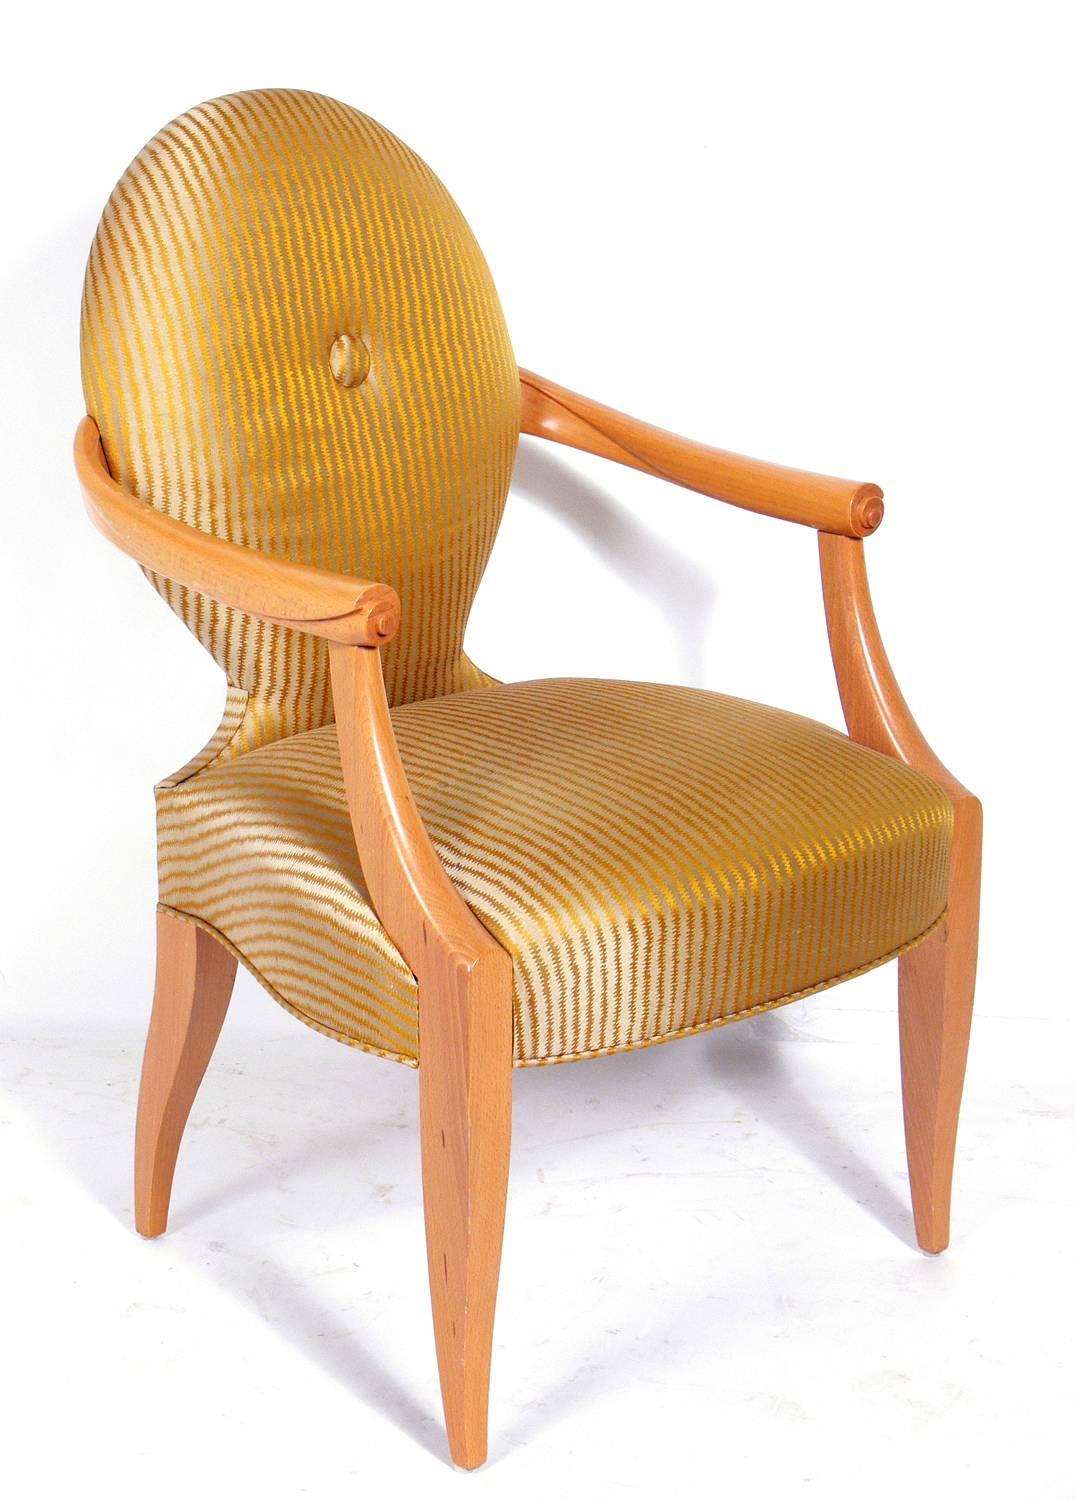 Elegant armchair designed by John Hutton for Donghia, circa 1990s. It would make a great desk or occasional chair. It is currently being reupholstered and can be completed in your fabric. The price noted below includes reupholstery in your fabric.